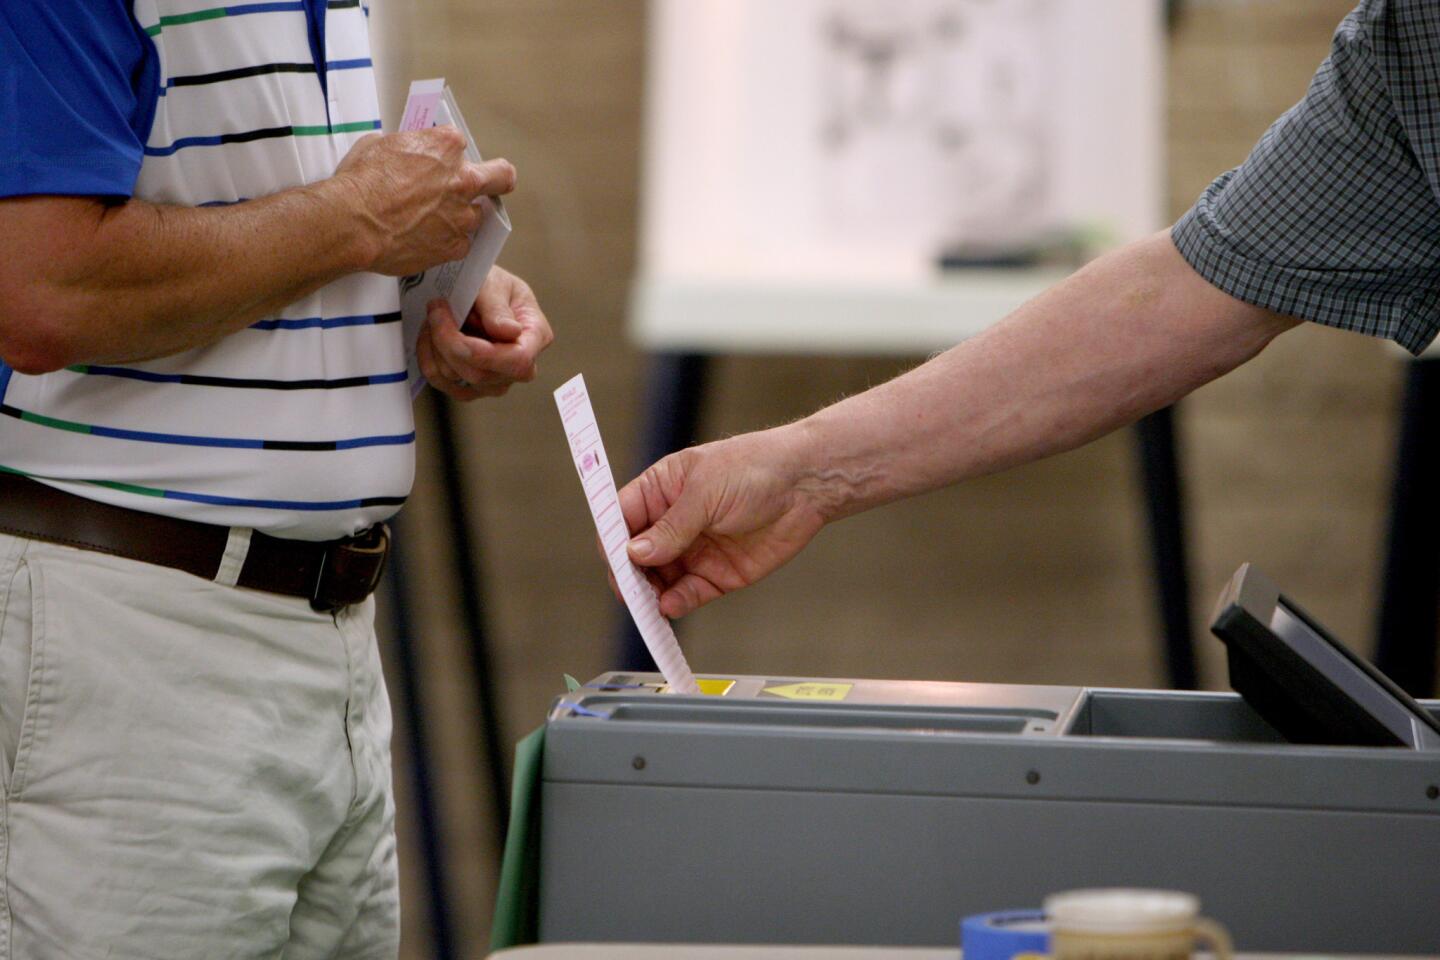 Photo Gallery: Locals turn out to vote at the public library in La Cañada Flintridgeq